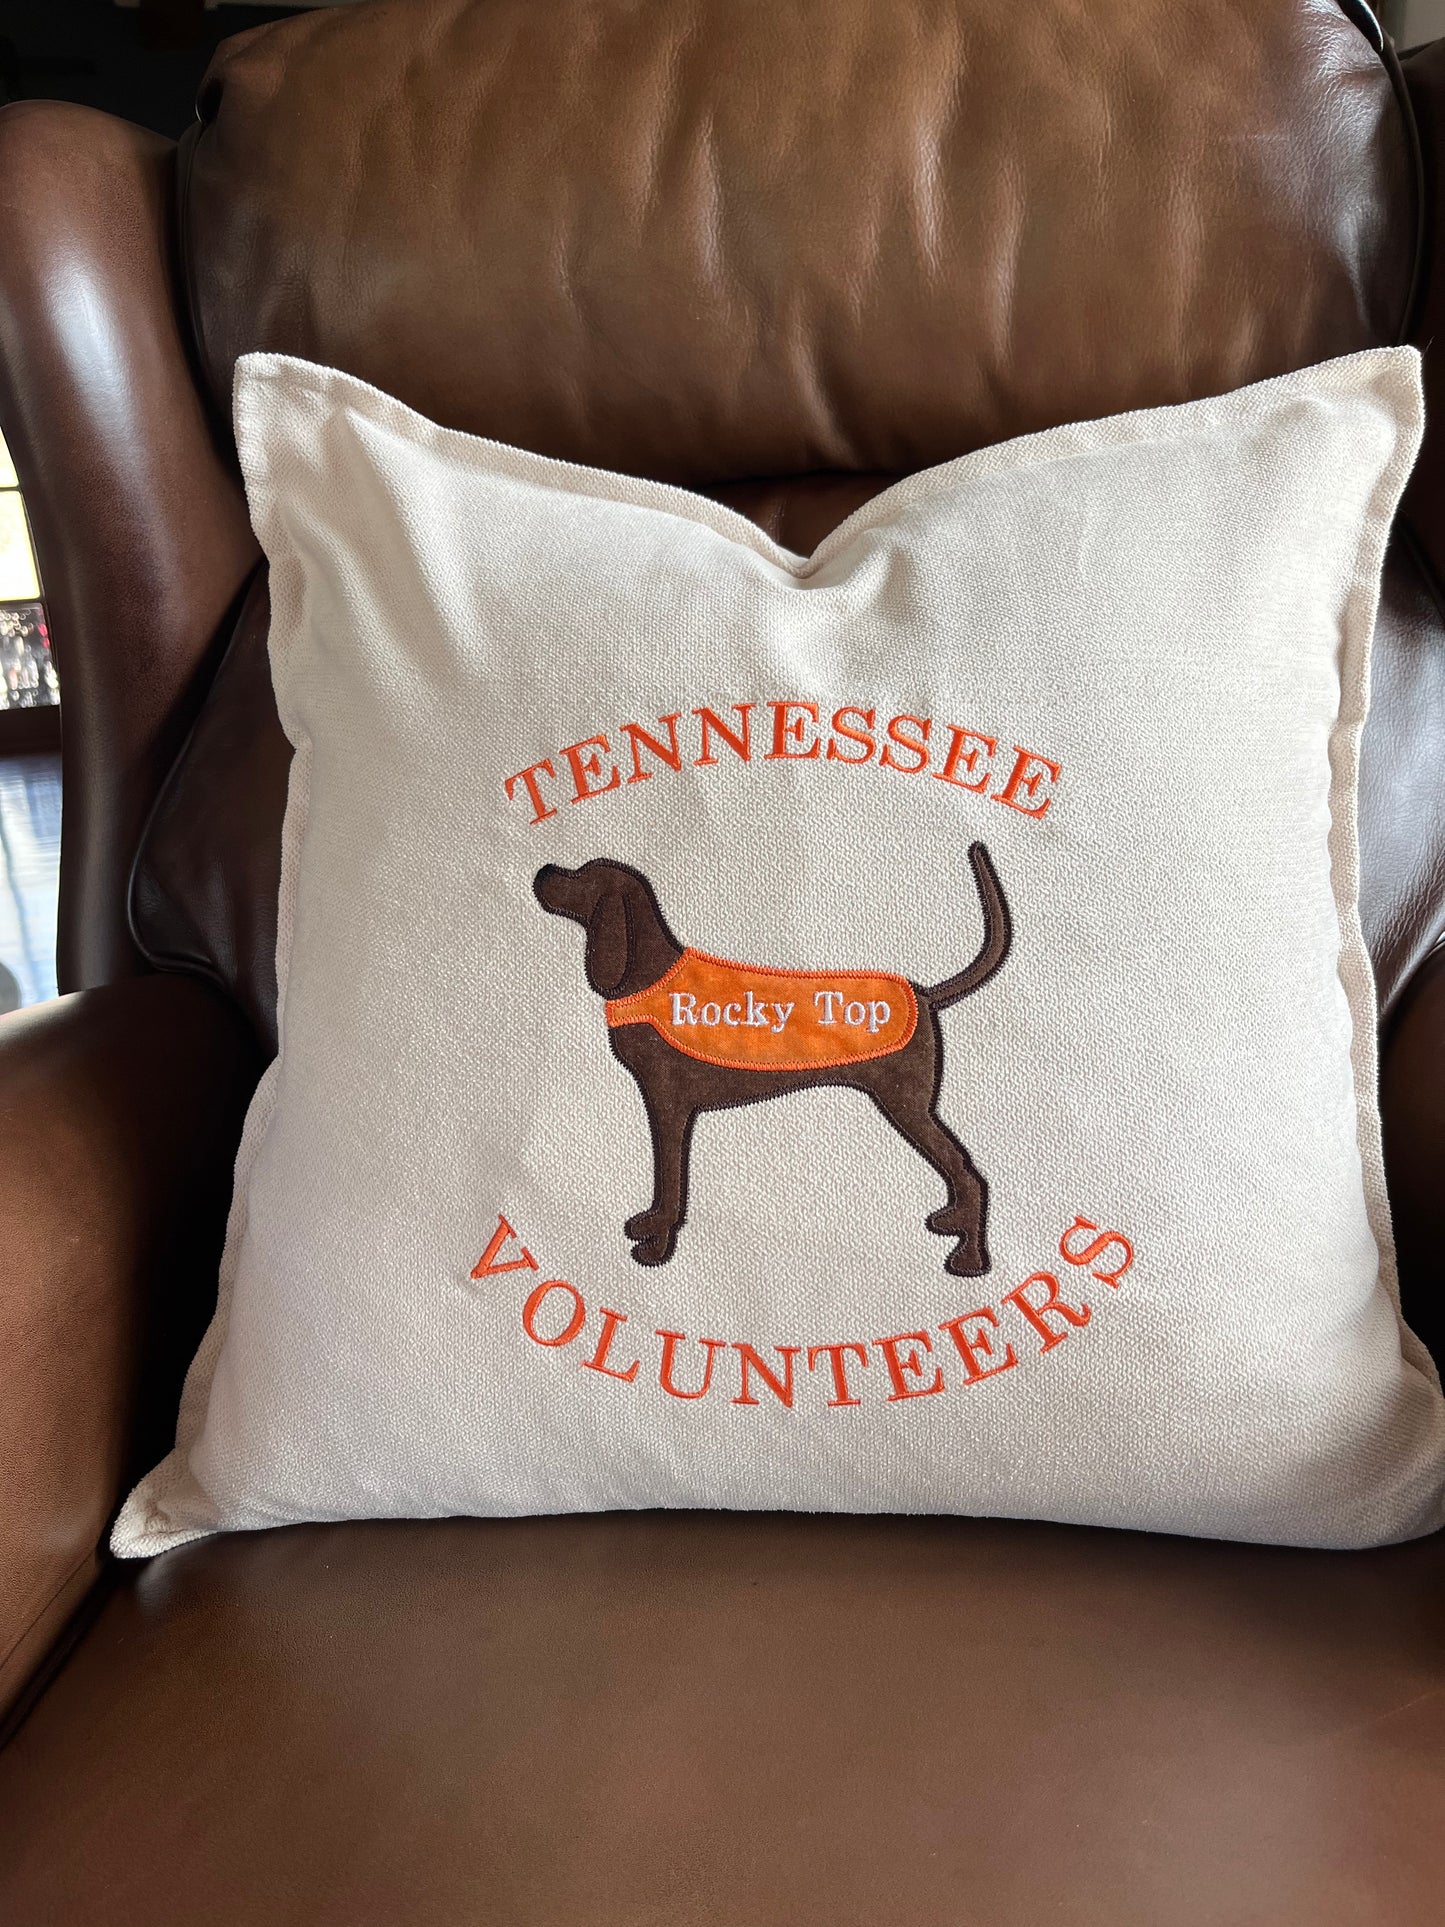 Tennessee Smokey Pillow Cover